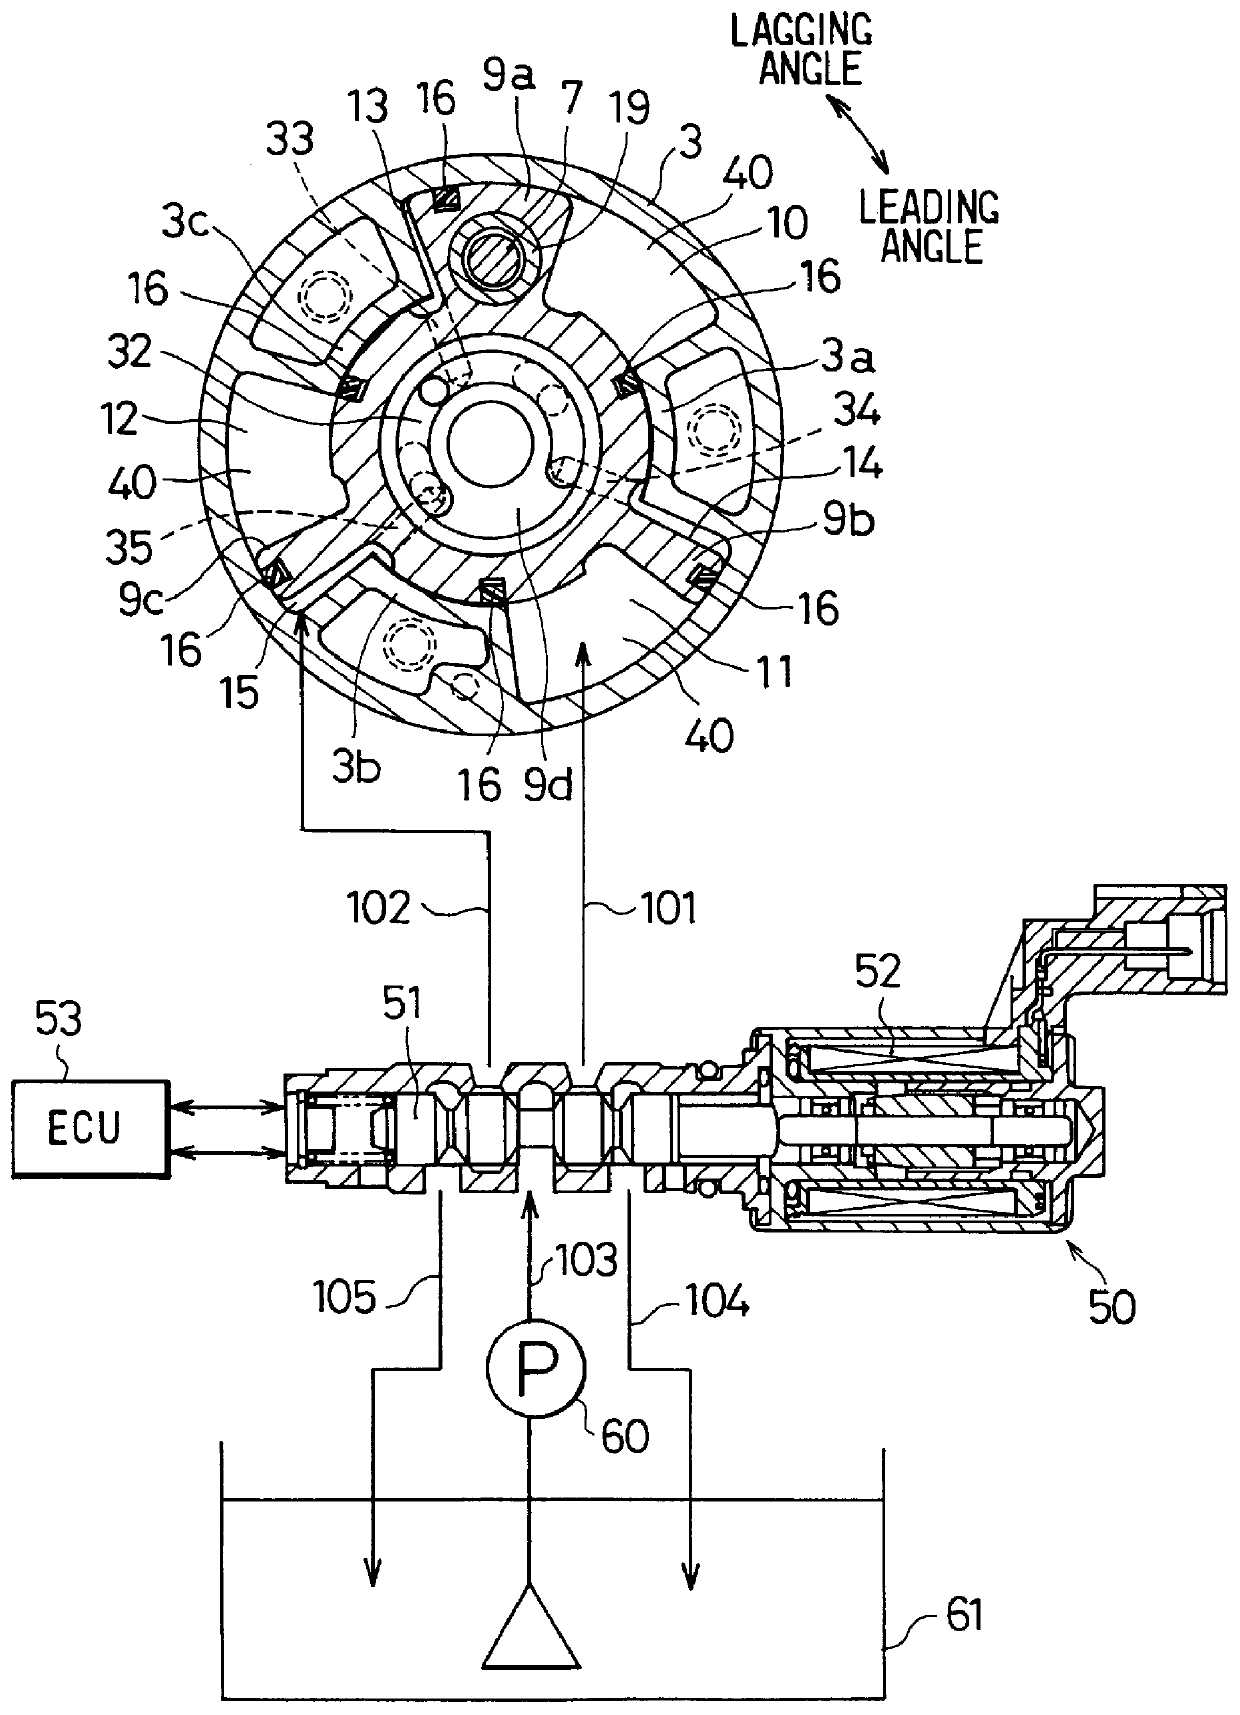 Valve timing adjusting apparatus for internal combustion engines